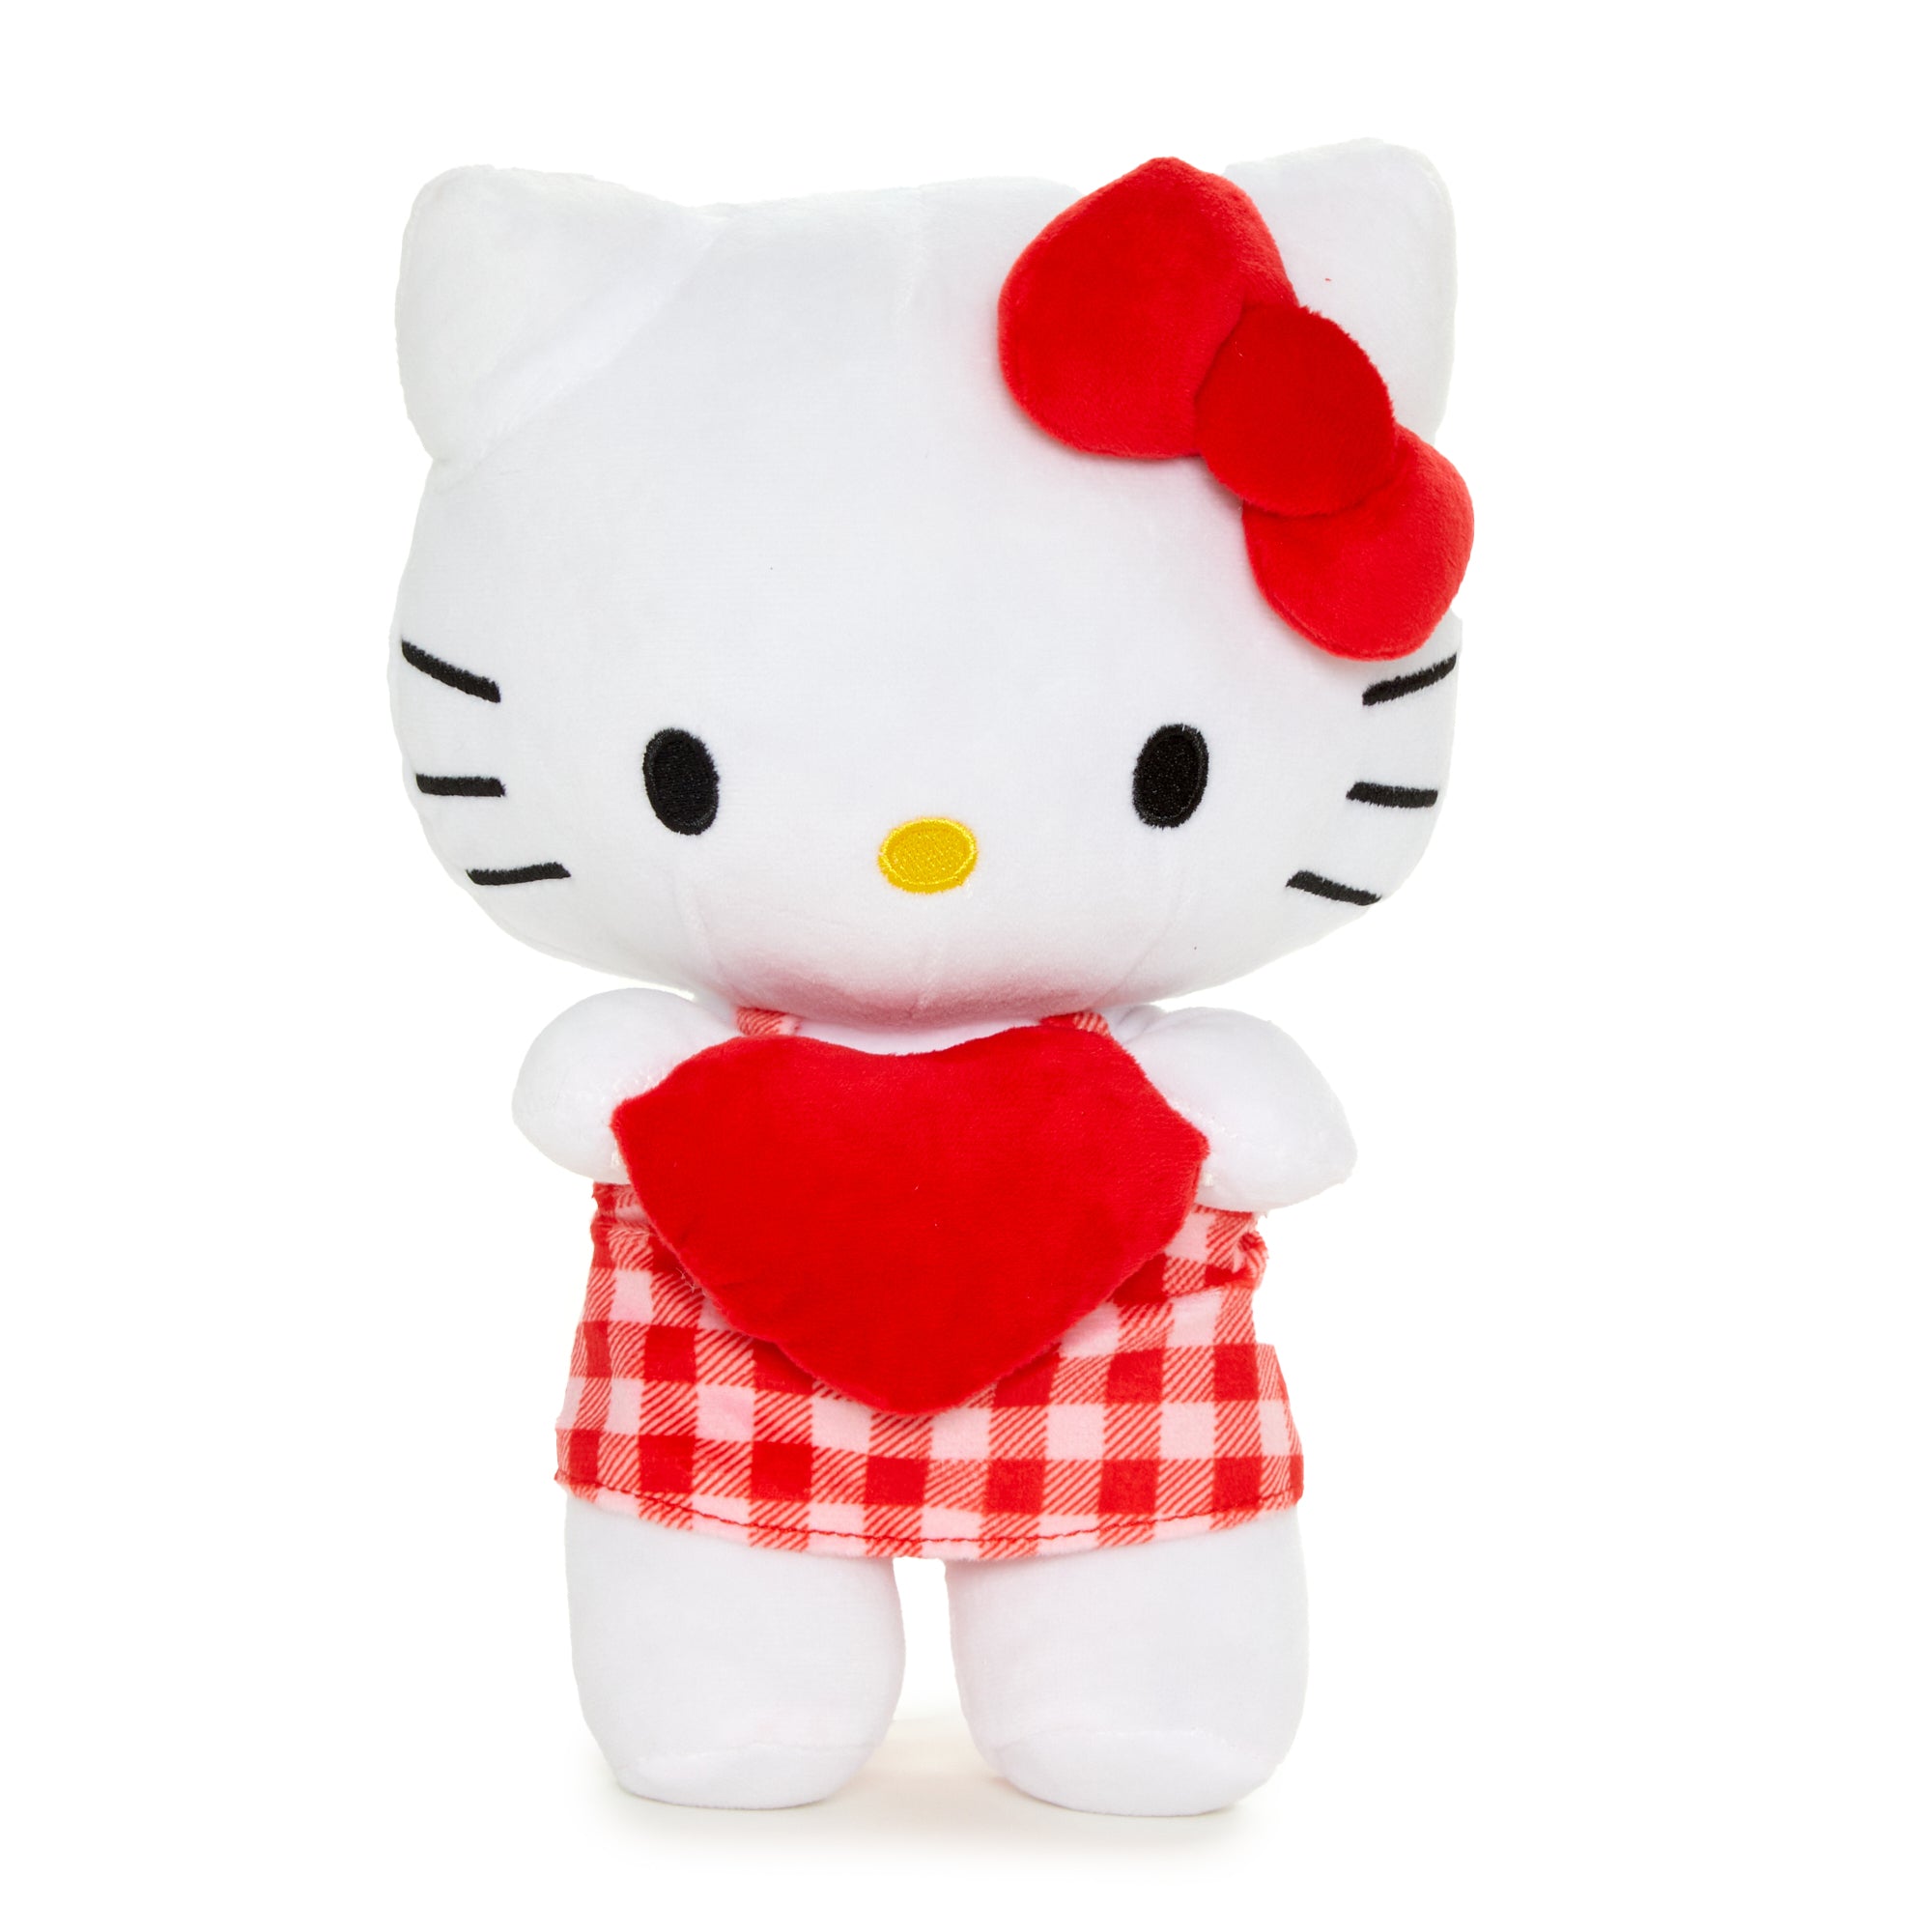 New Sanrio Hello Kitty Mailbox & Valentine's Cards, Exchange Kits -  collectibles - by owner - sale - craigslist